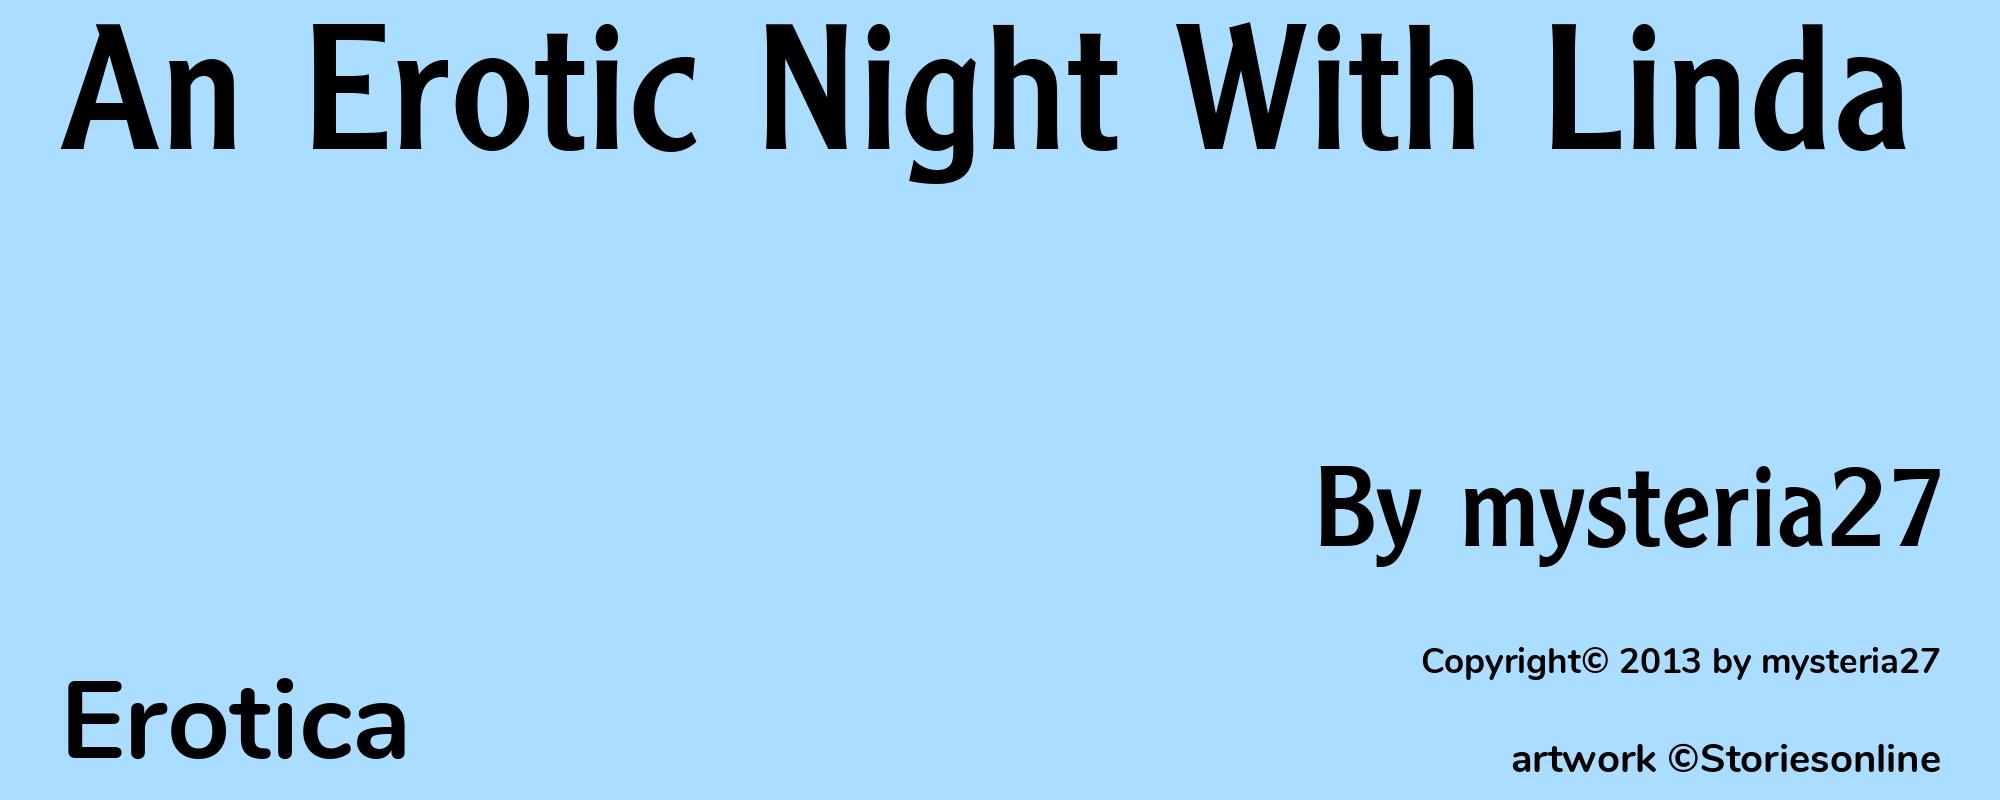 An Erotic Night With Linda - Cover